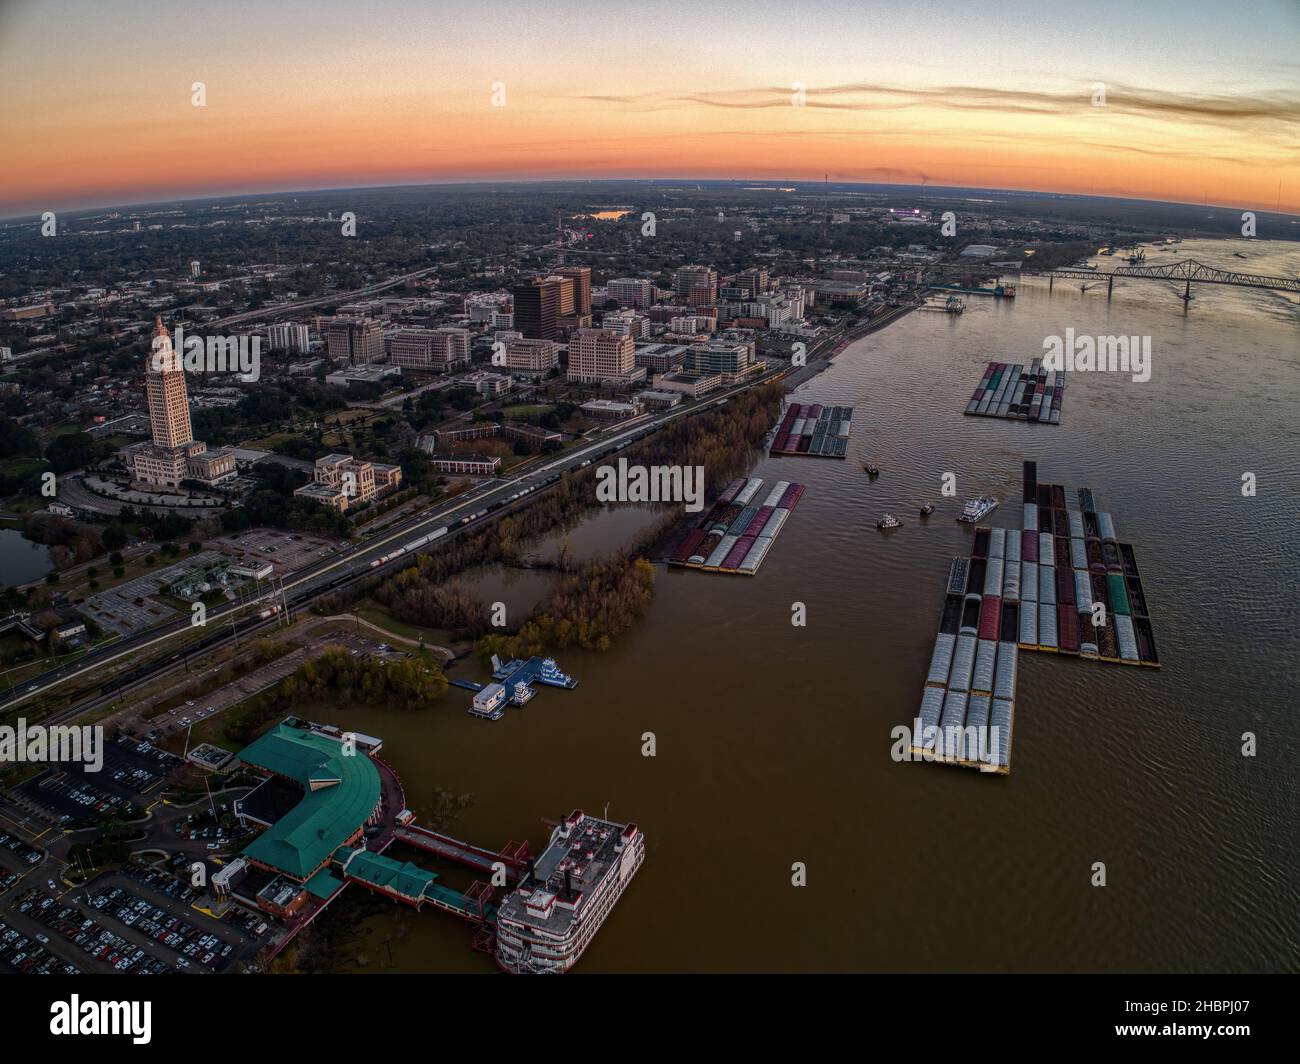 An aerial view of Baton Rouge, the Capitol of the American State of Louisiana at sunset Stock Photo